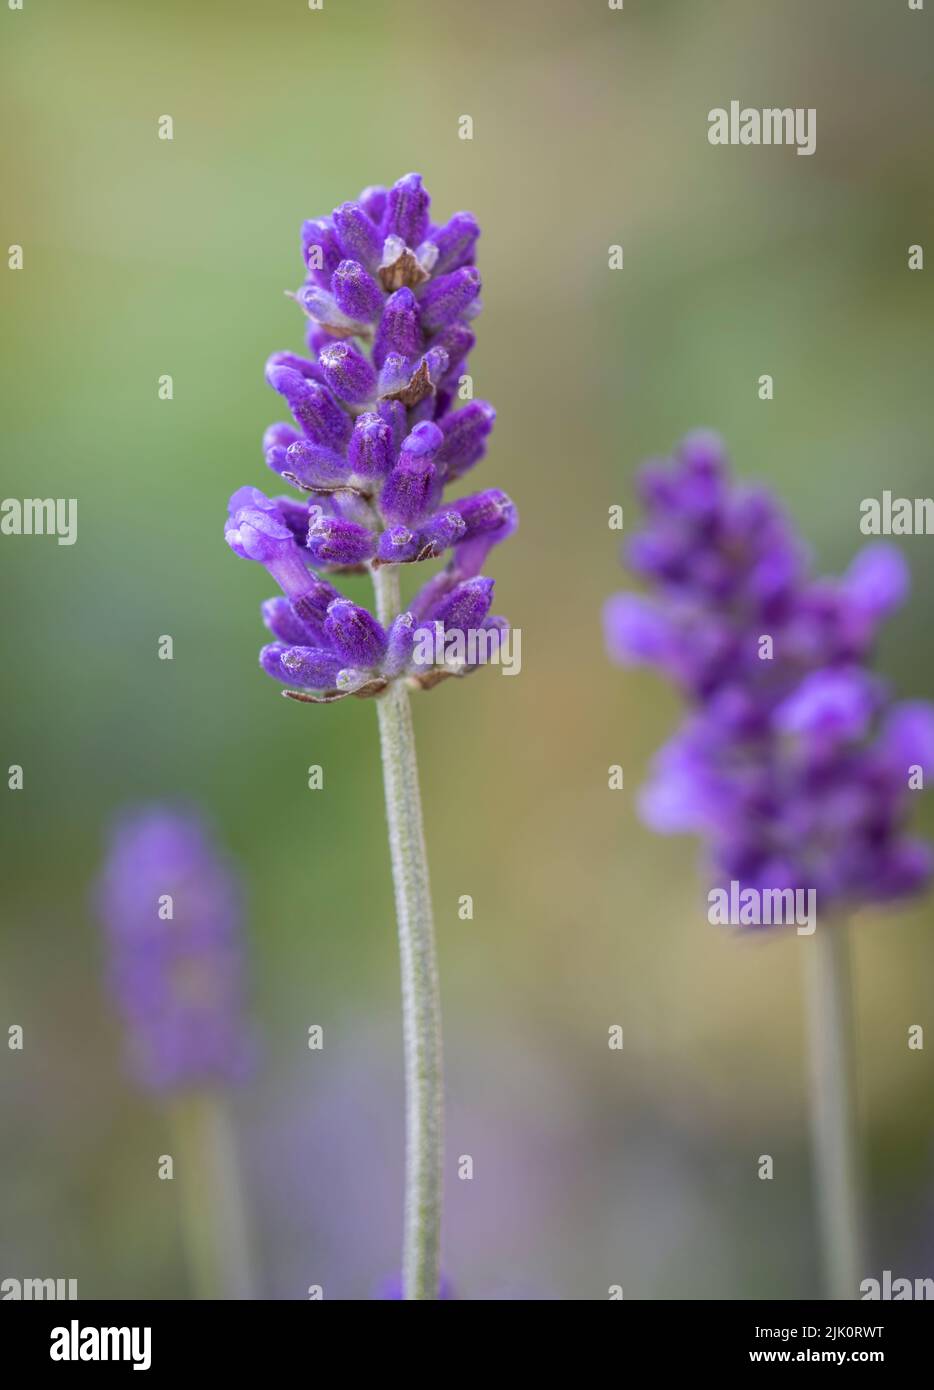 A close up of a Lavender flower against a background of out of focus lavender flowers Stock Photo